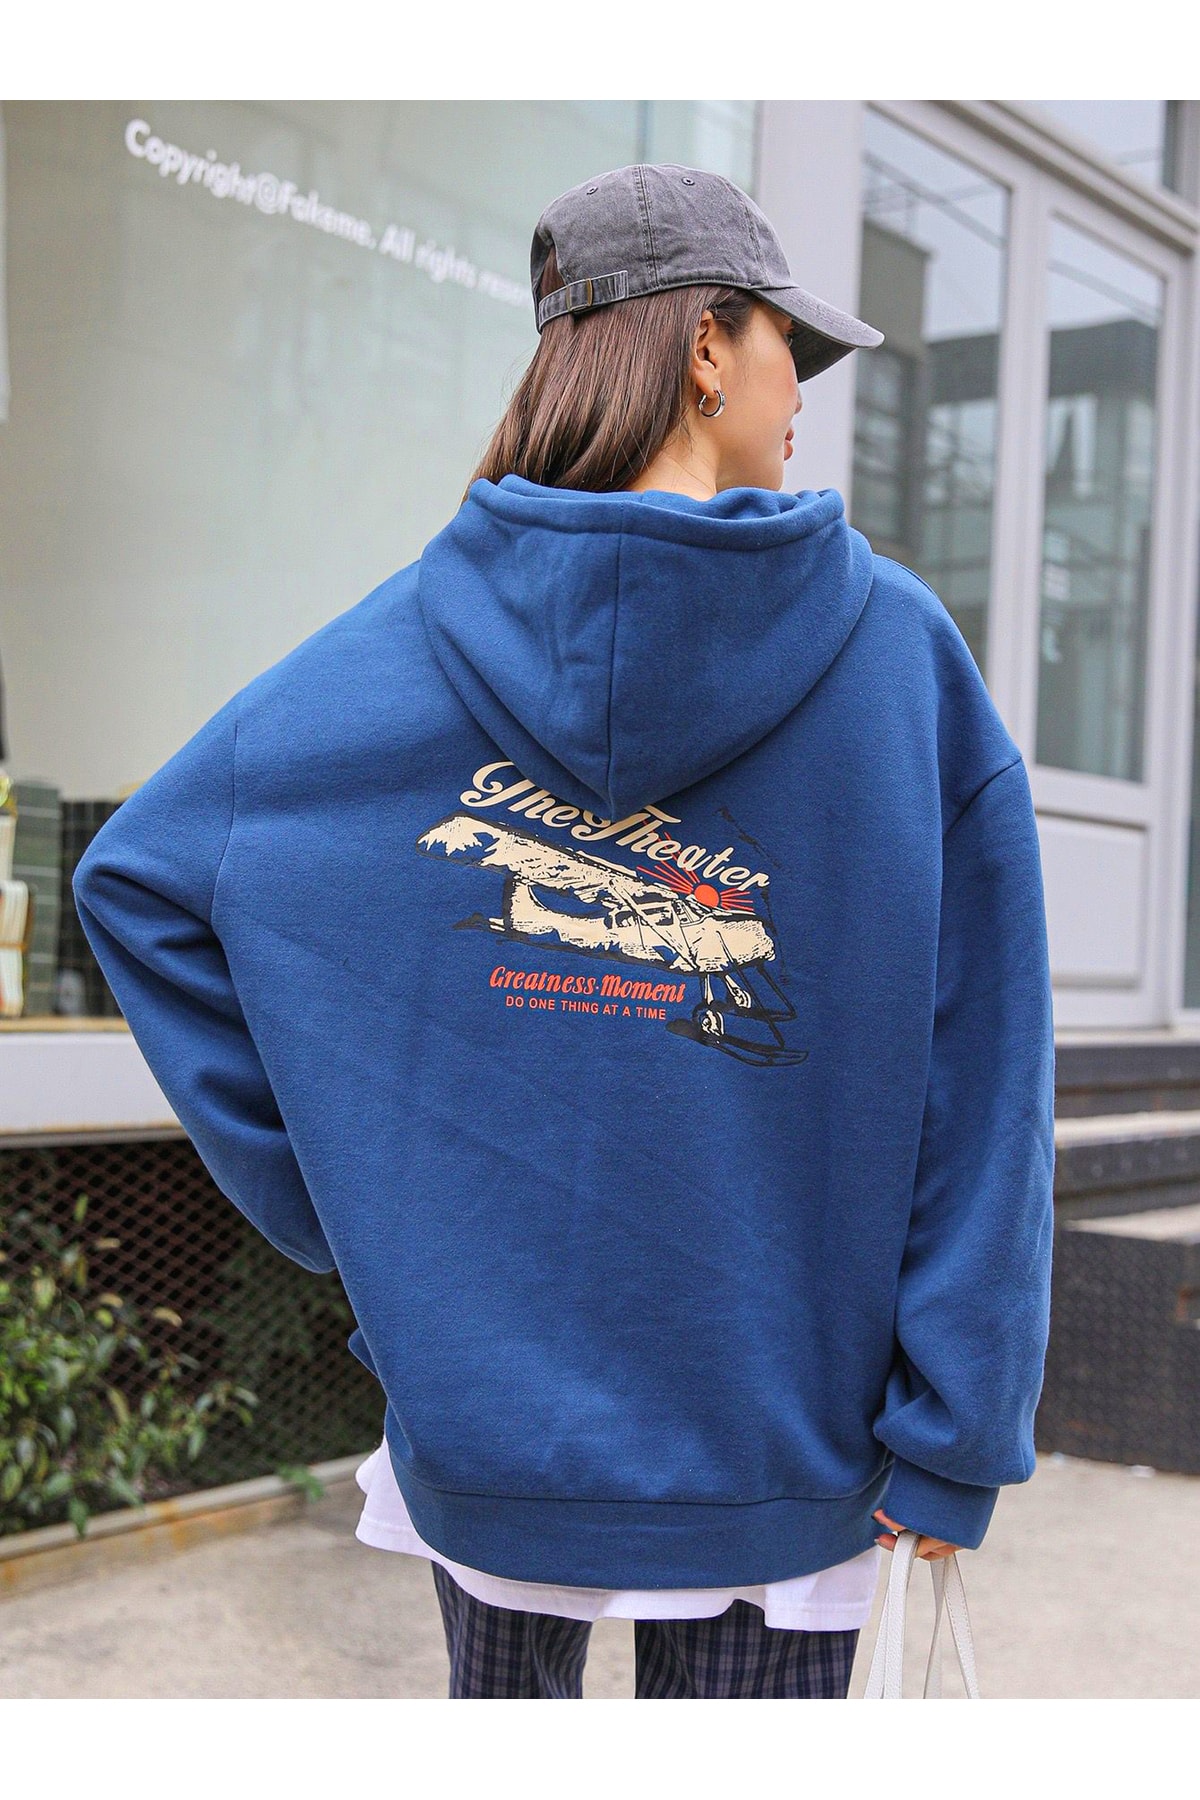 Know Women's Royal The Theater Printed Hoodie With Sweatshirt.